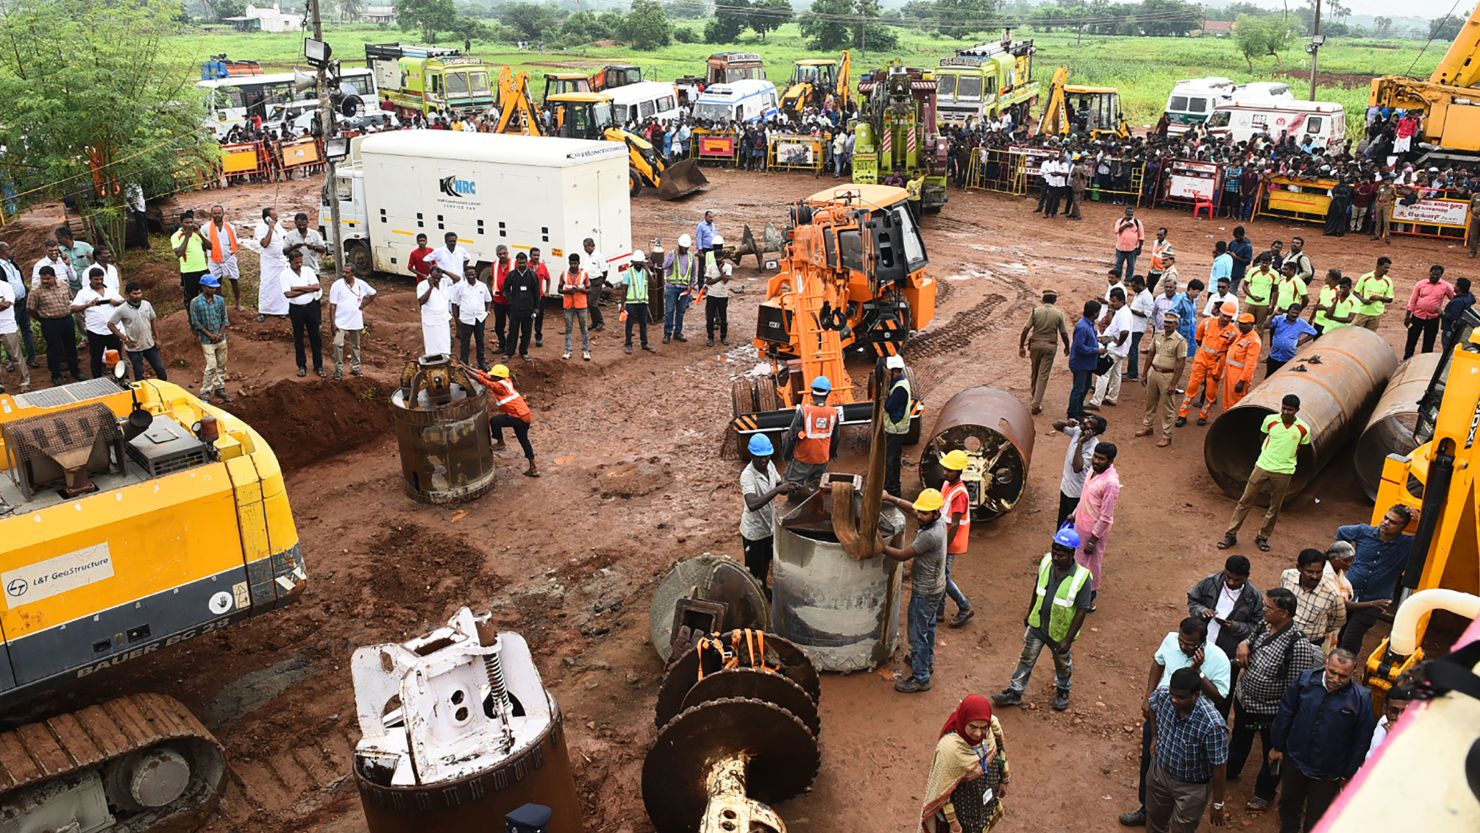 Rescue workers gather with heavy digging equipment during an operation to rescue a toddler stuck in a deep well.